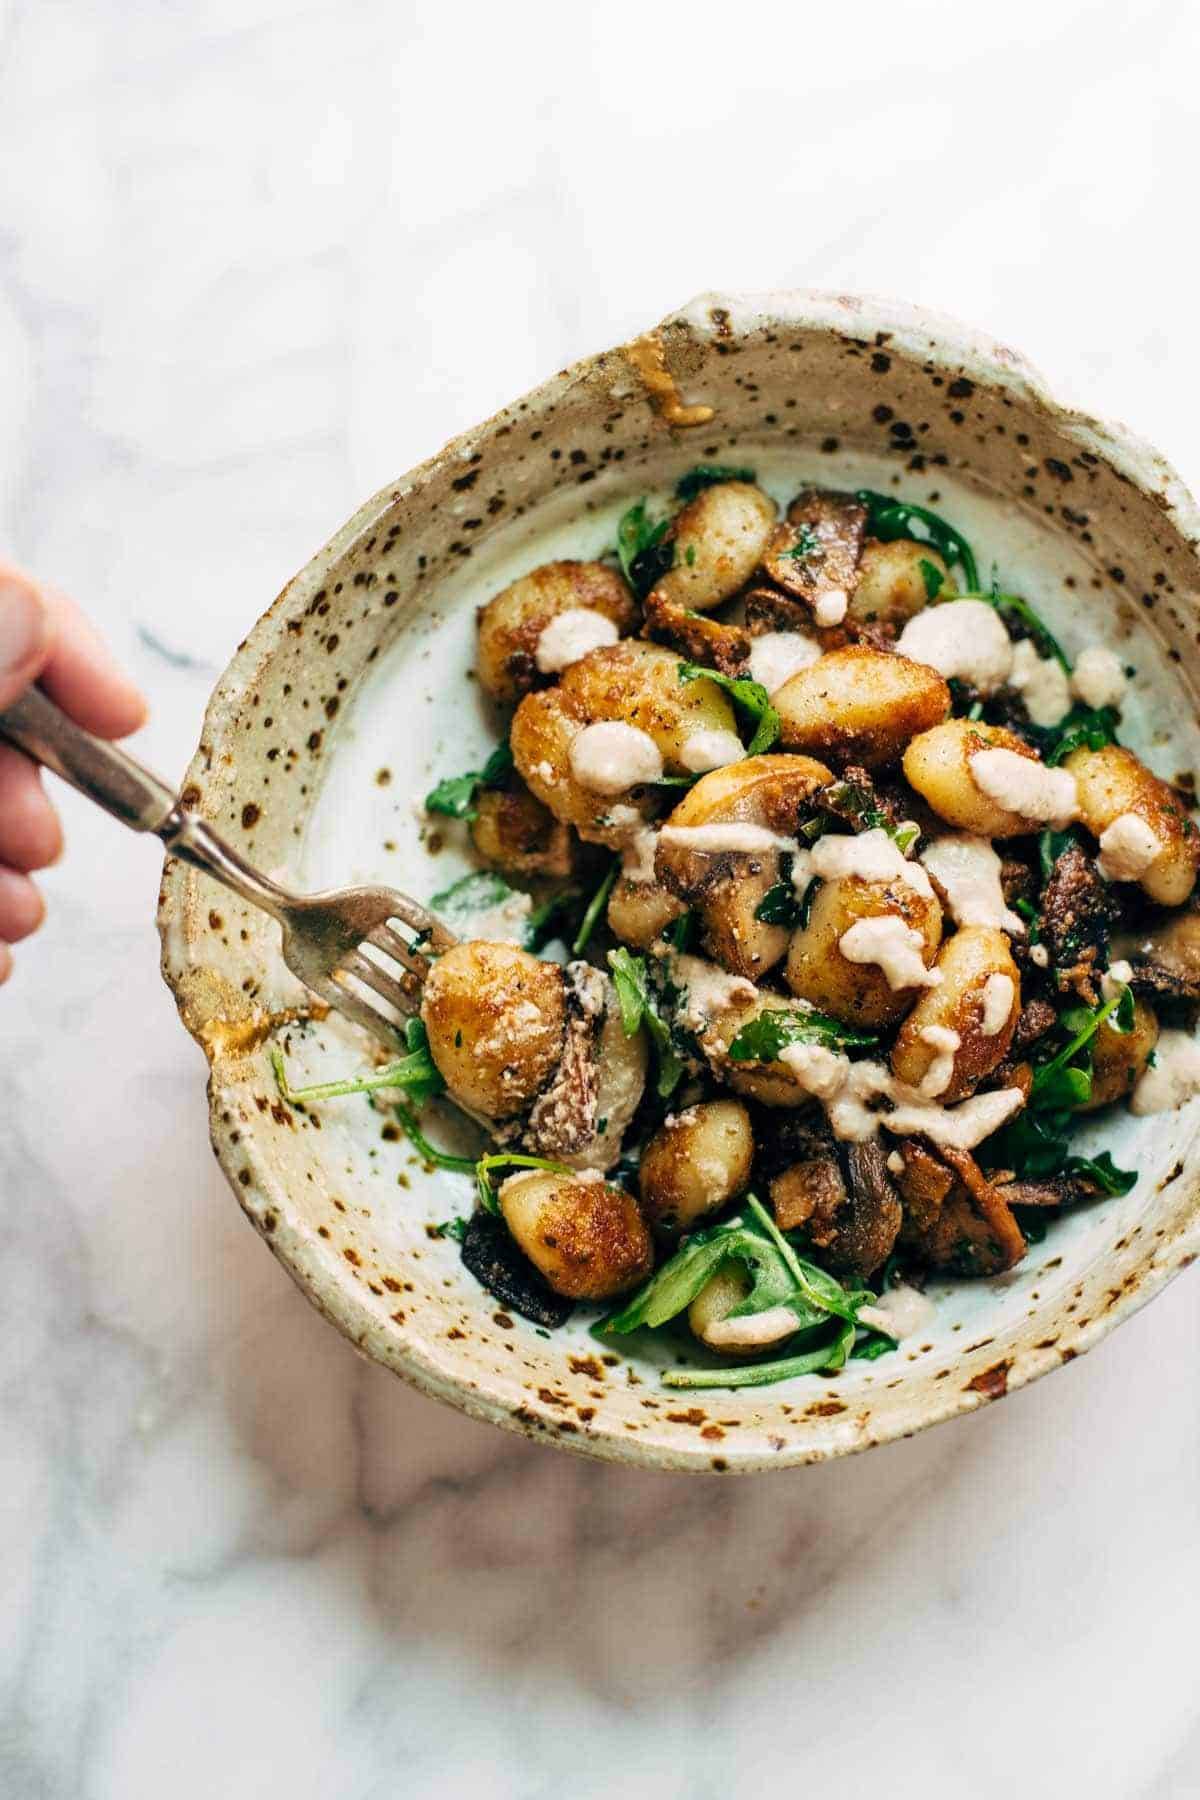 Mushroom Gnocchi with Walnut Pesto and Arugula - a vegetarian bowl that's made with familiar ingredients. Comes together in 30 minutes or less! | pinchofyum.com